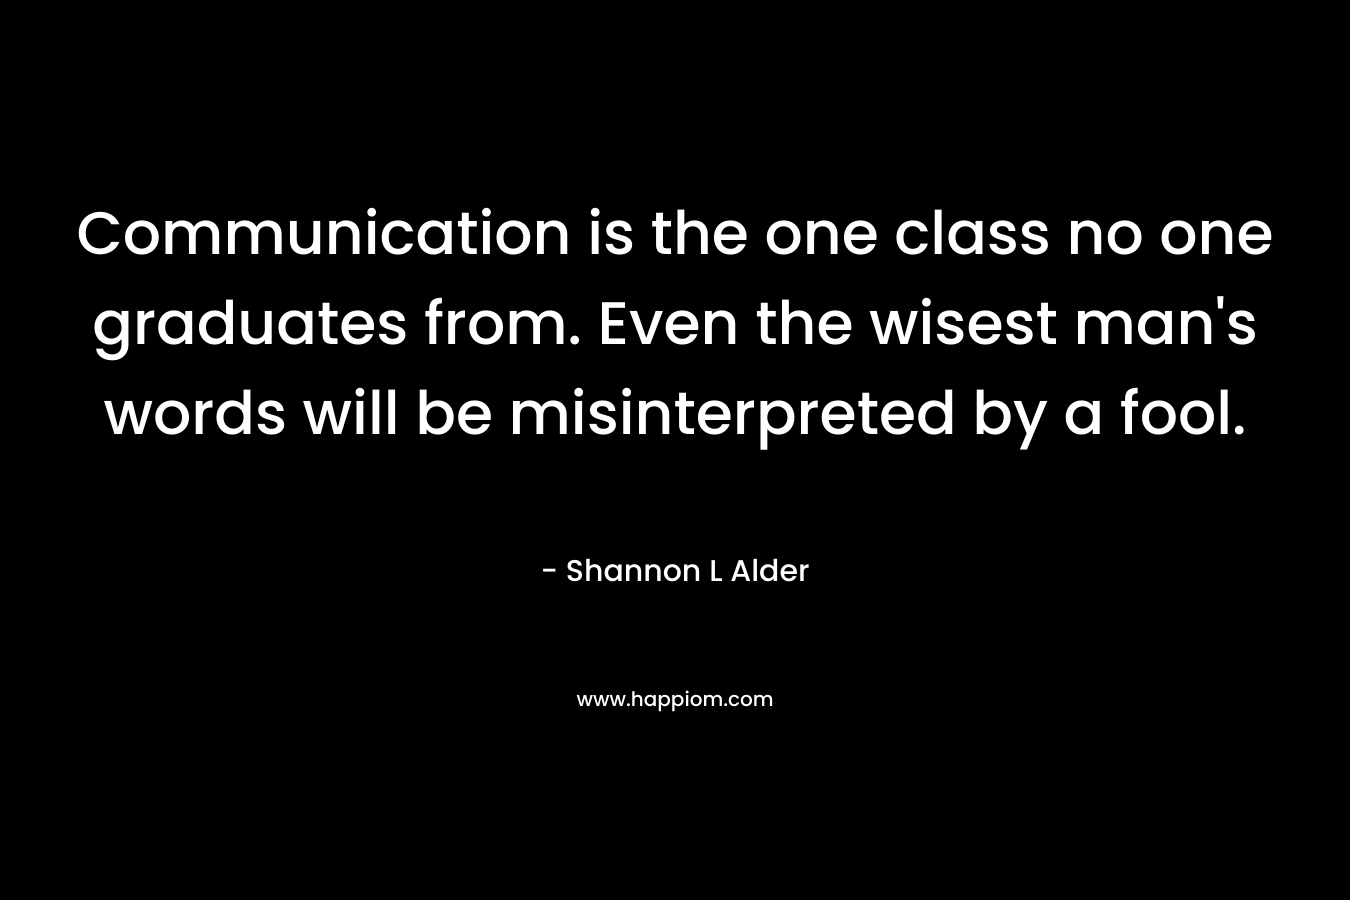 Communication is the one class no one graduates from. Even the wisest man's words will be misinterpreted by a fool.